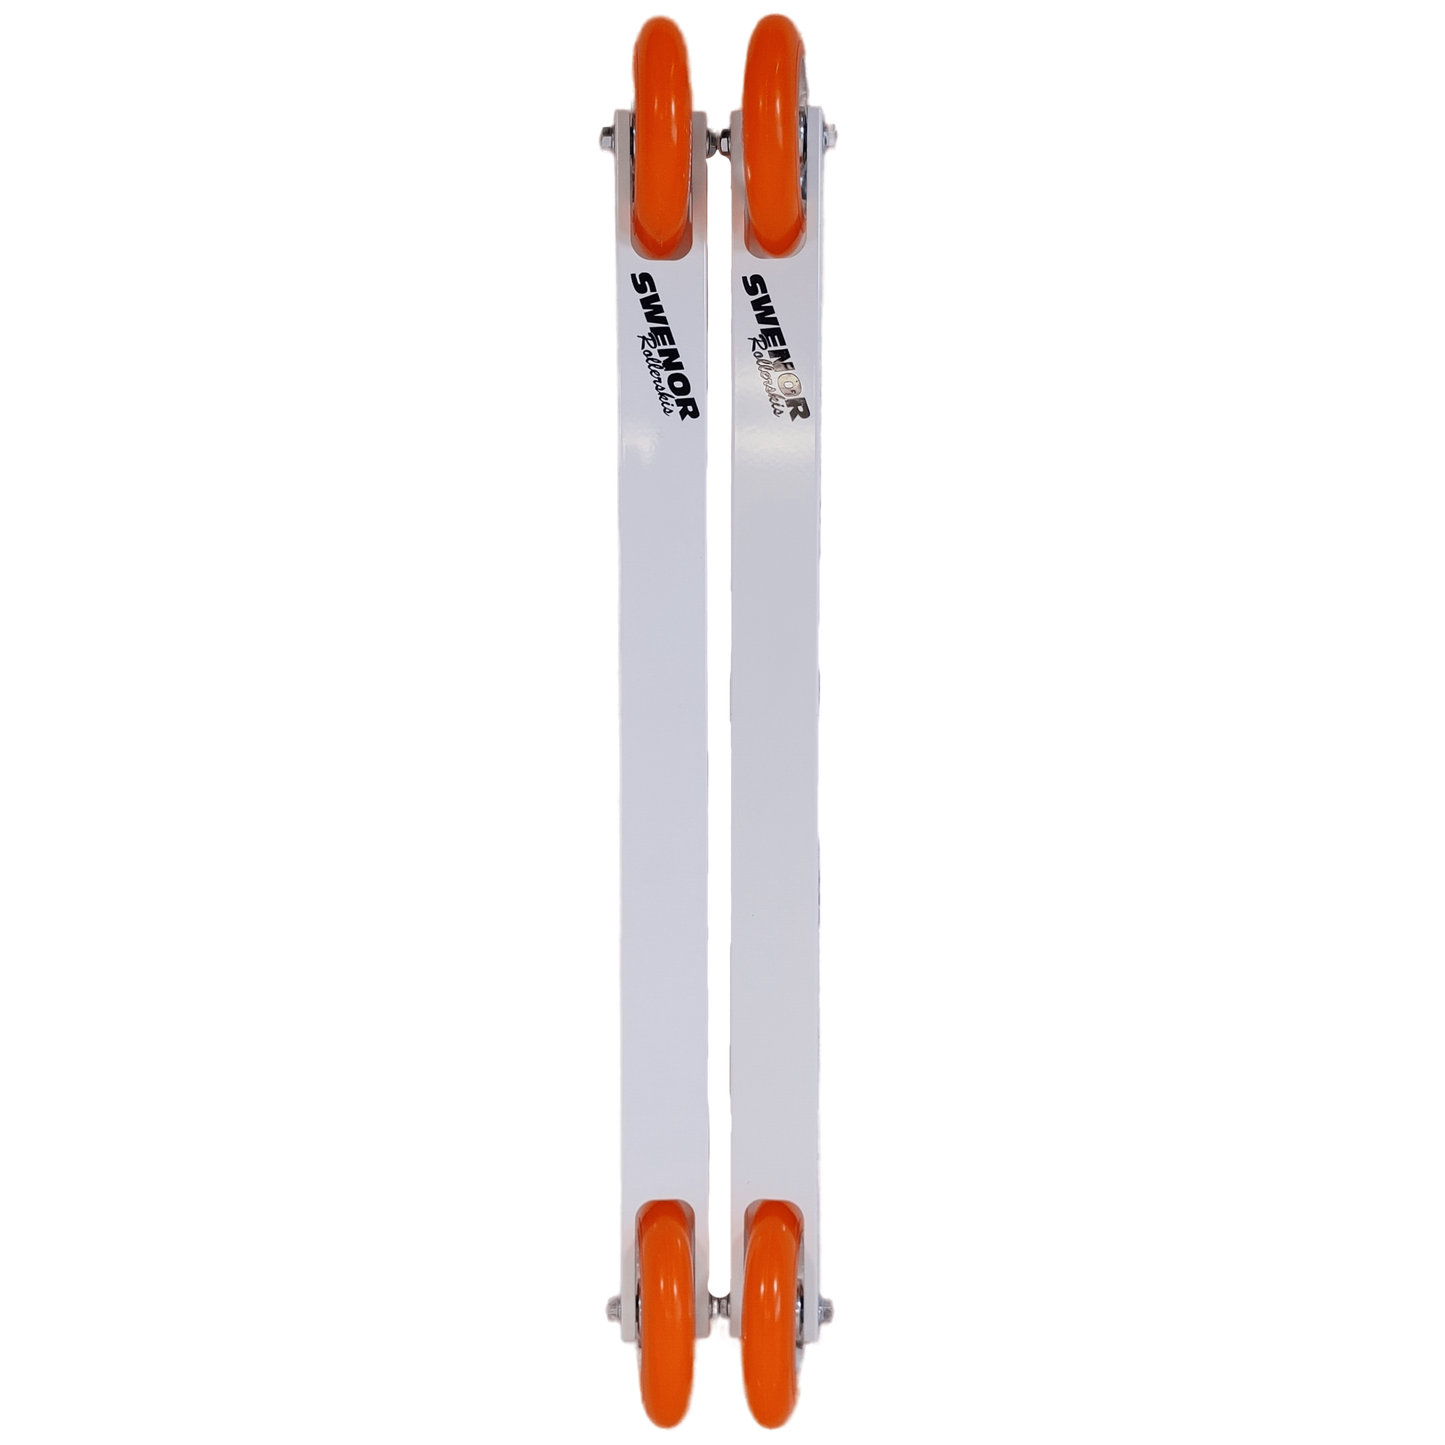 A product picture of the Swenor Skate Equipe R2 Aluminum Racing Rollerskis